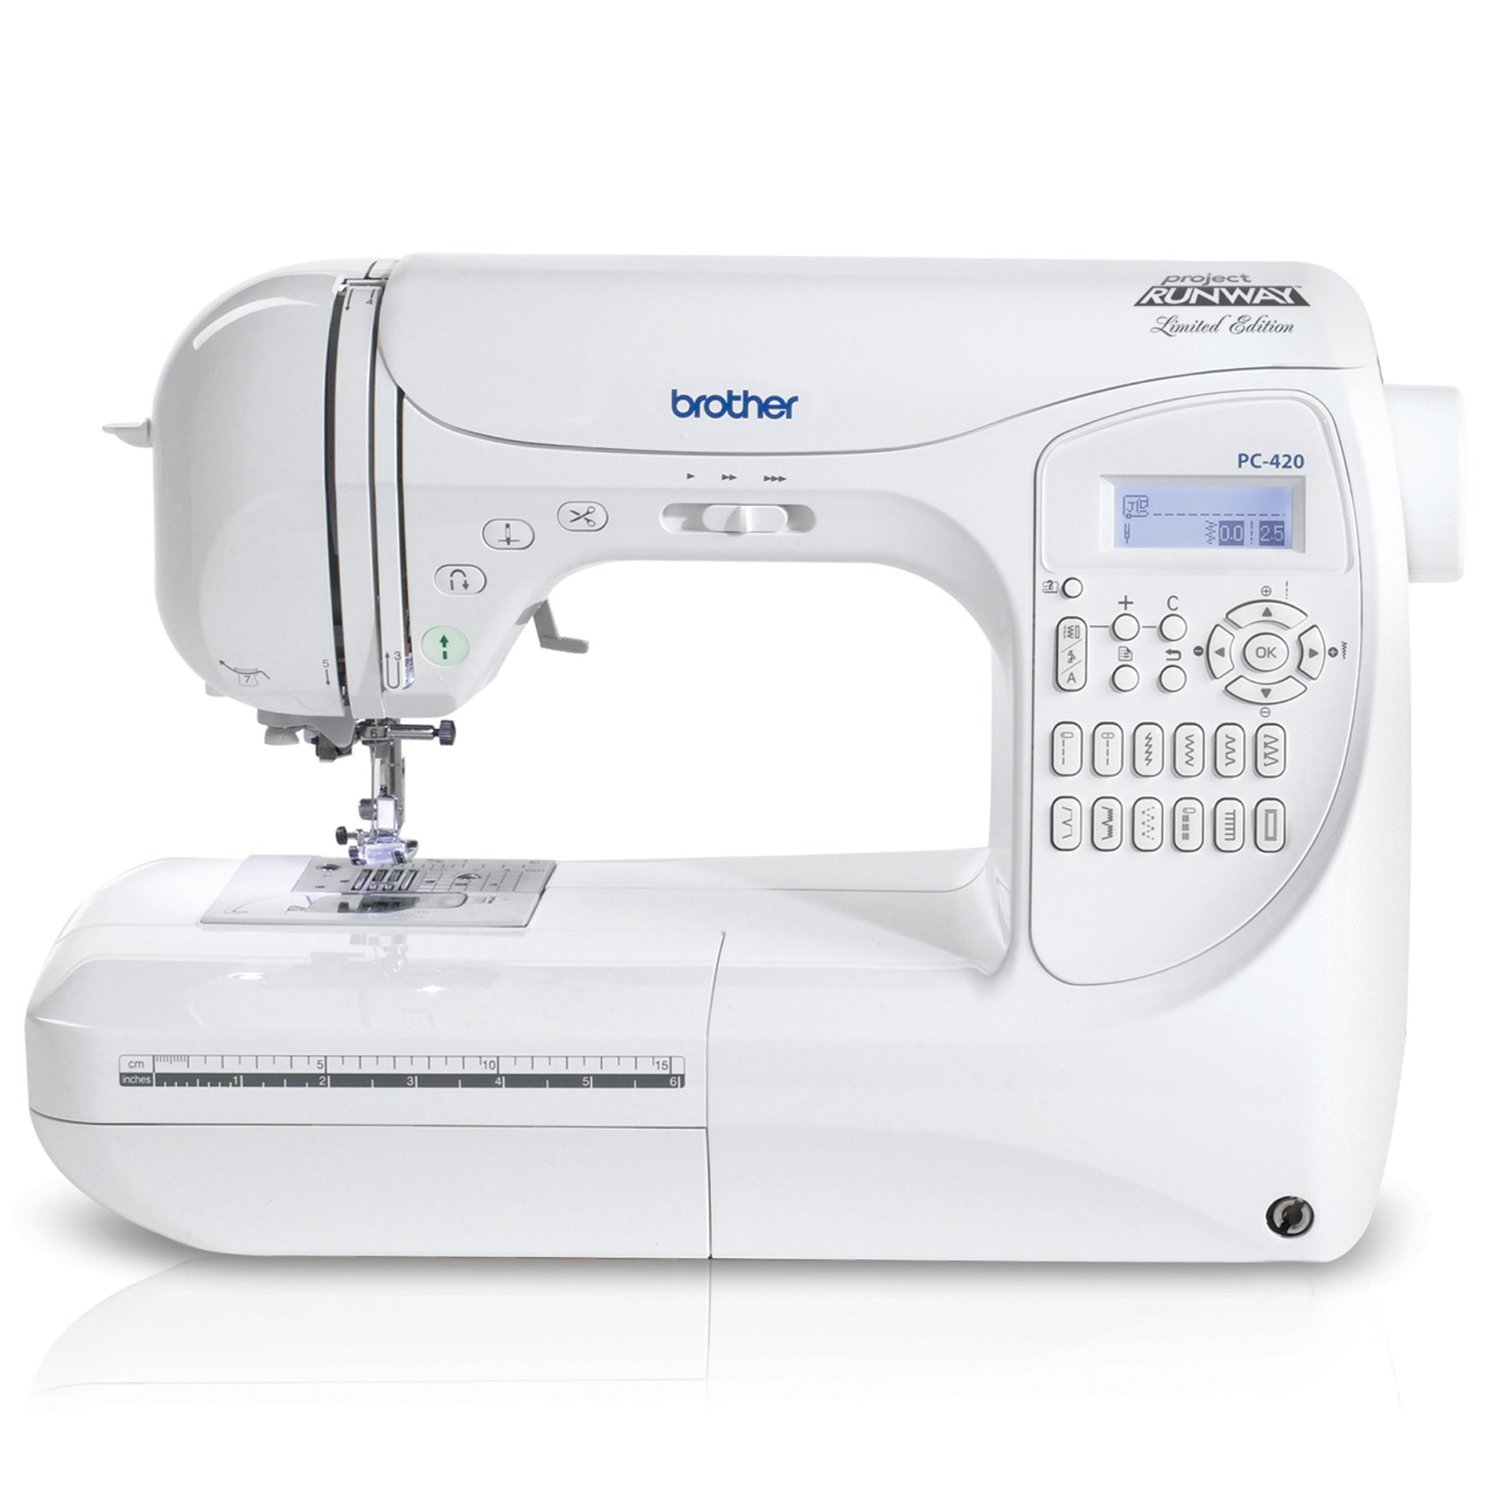 Best Brother Sewing & Embroidery Machine Review: This high-end Brother machine is for you if you're a pro sewer & embroiderer